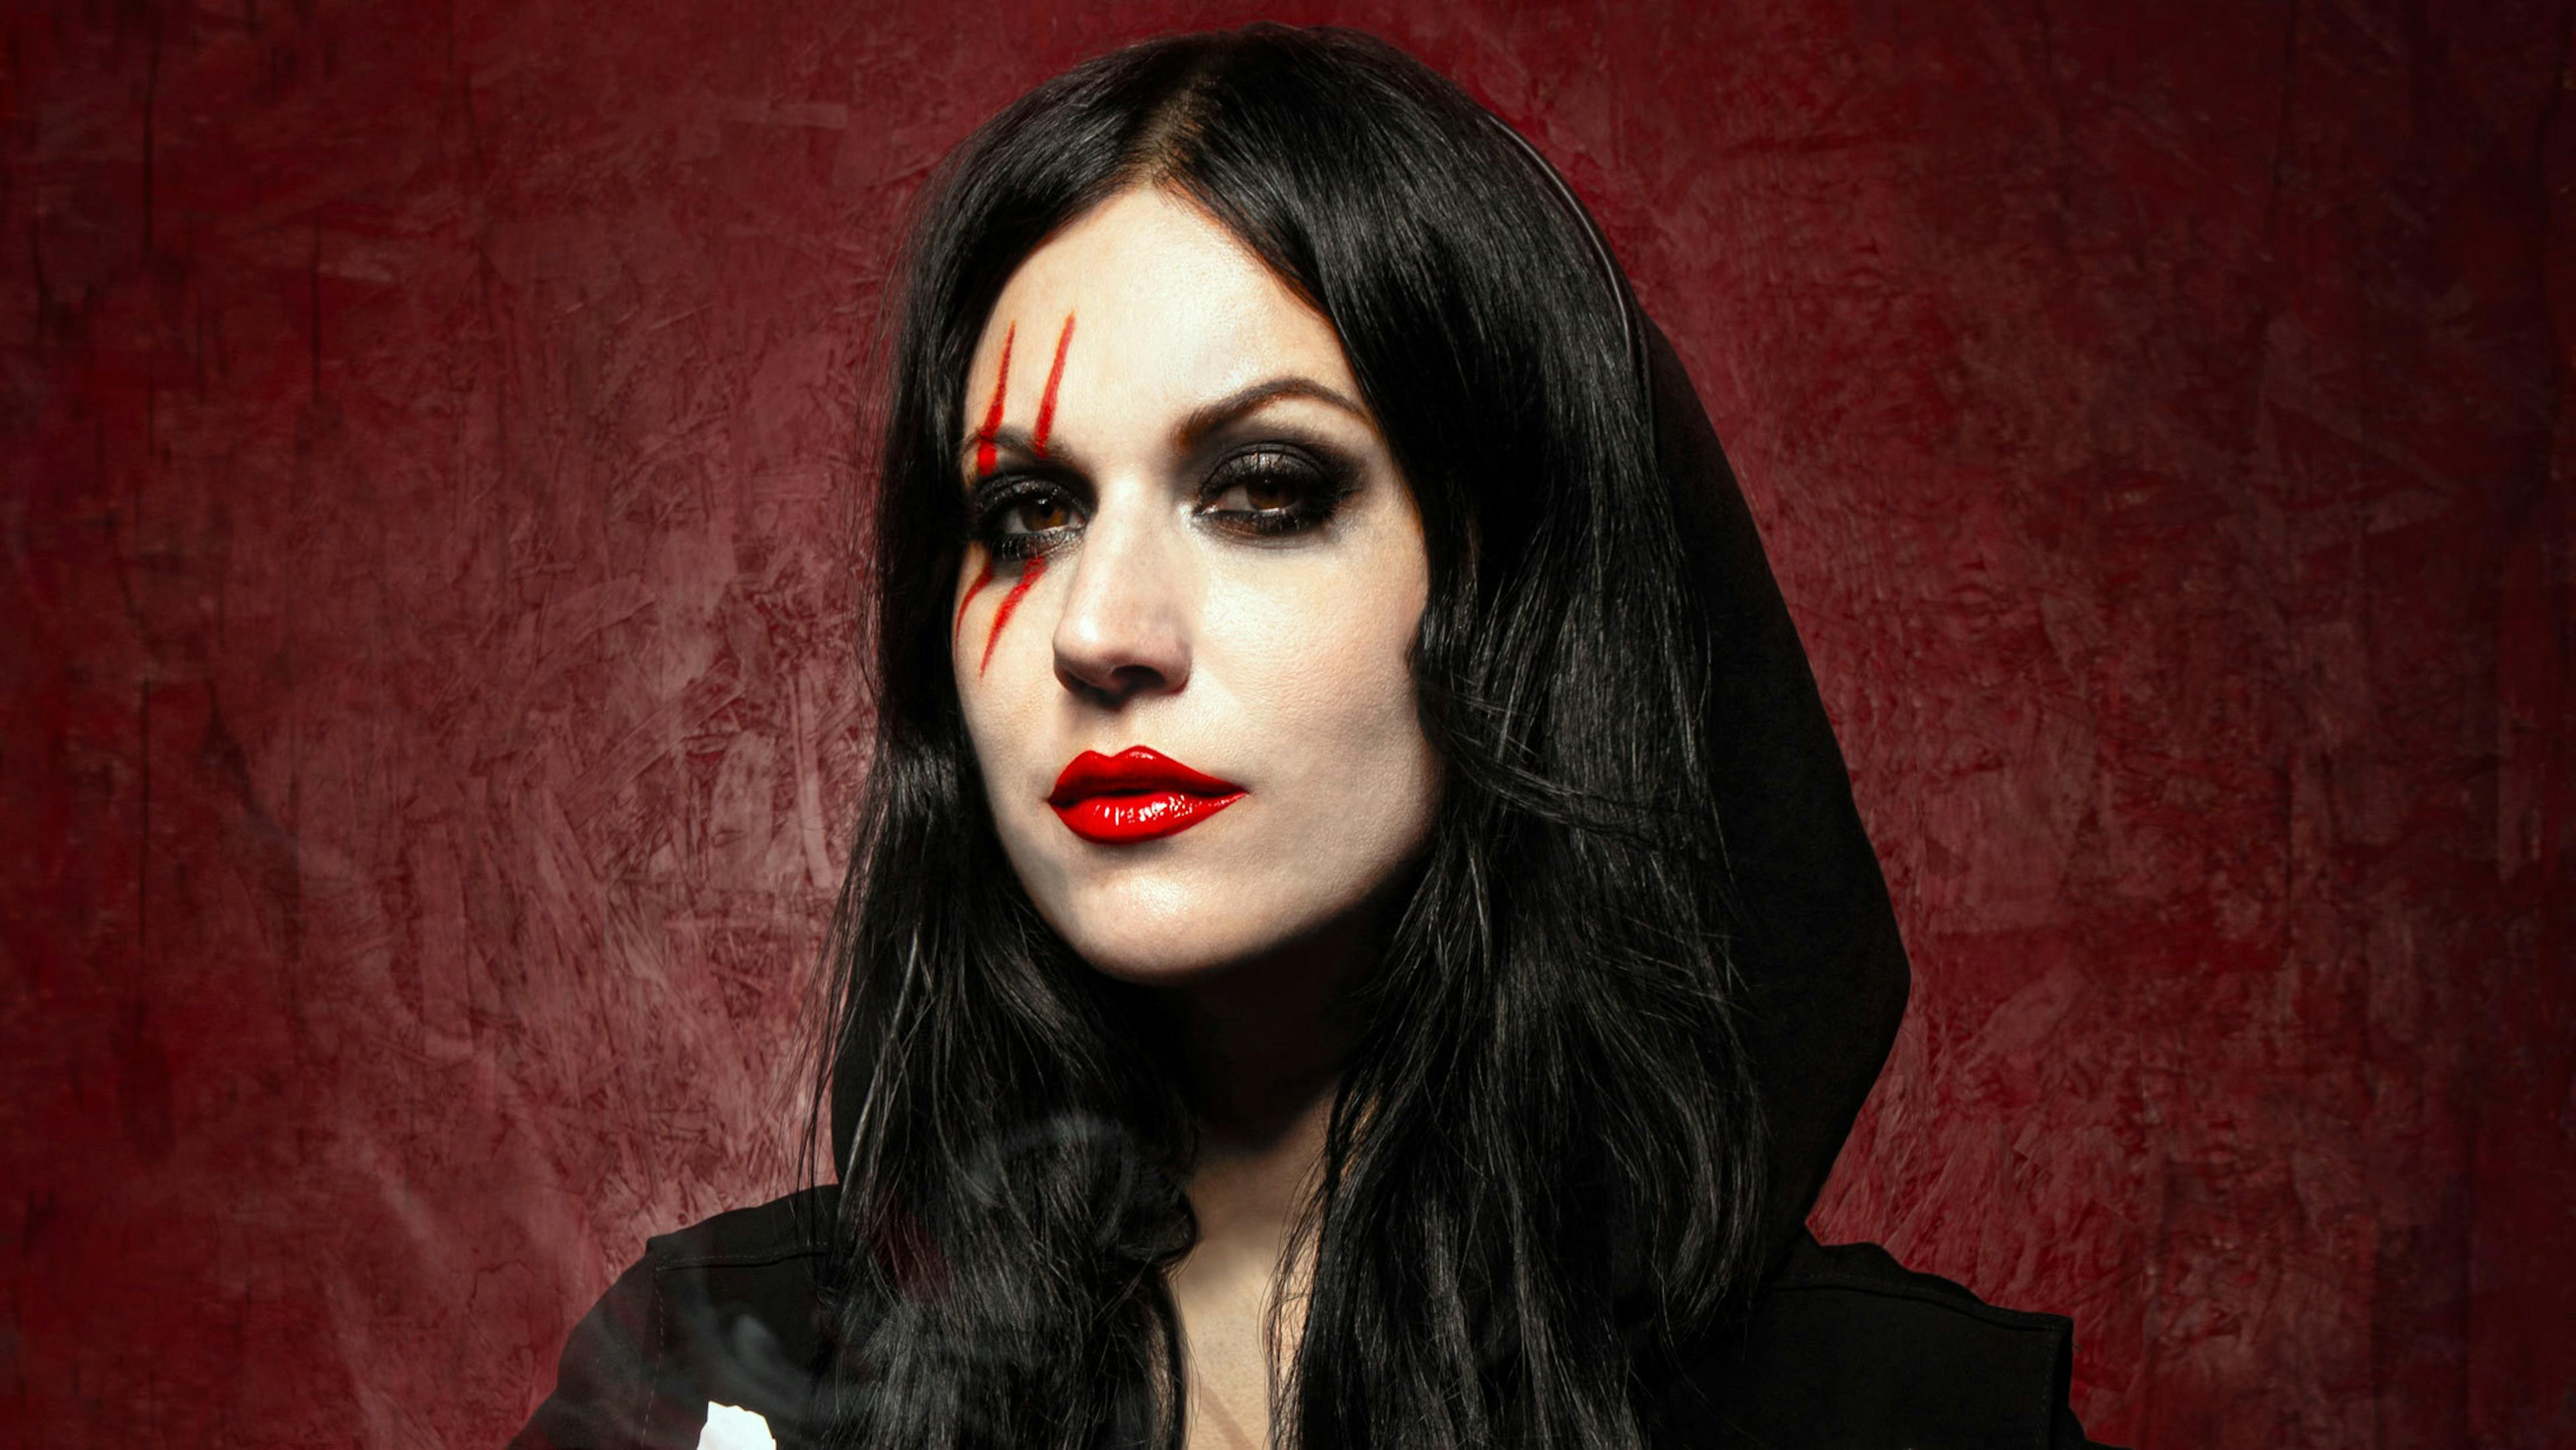 Cristina Scabbia On Coronavirus: "The Whole World Is Involved And [Italy] Didn't Create This Virus"